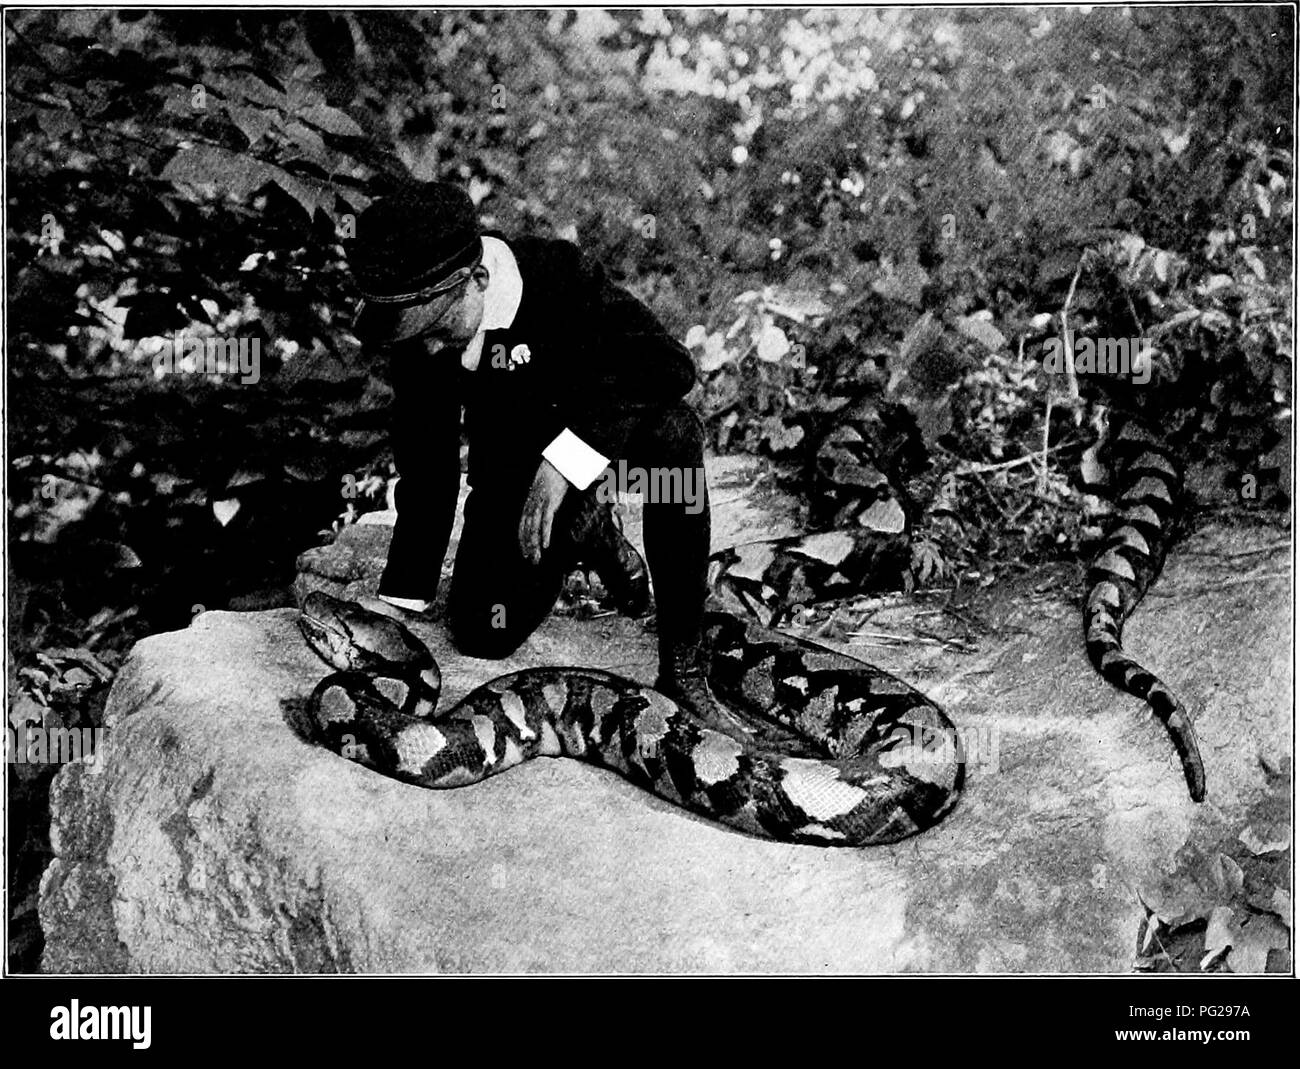 . The American natural history; a foundation of useful knowledge of the higher animals of North America. Natural history. TWENTY-TWO-FOOT RETICULATED PYTHON (dEAD). New York Zoological Park. CHAPTER XXXIX THE ORDER OF SERPENTS General Characters.—A serpent, commonly called a &quot;snake,&quot; is a very slender, long-bodied, legless reptile, cold-blooded, covered with scales, and breathing air. It moves by a sinuous mo- tion, in which the scales under the bodj^ grip the earth, while the extension of the body muscles push the body forward. To afford a good hold upon the earth, the abdominal sca Stock Photo